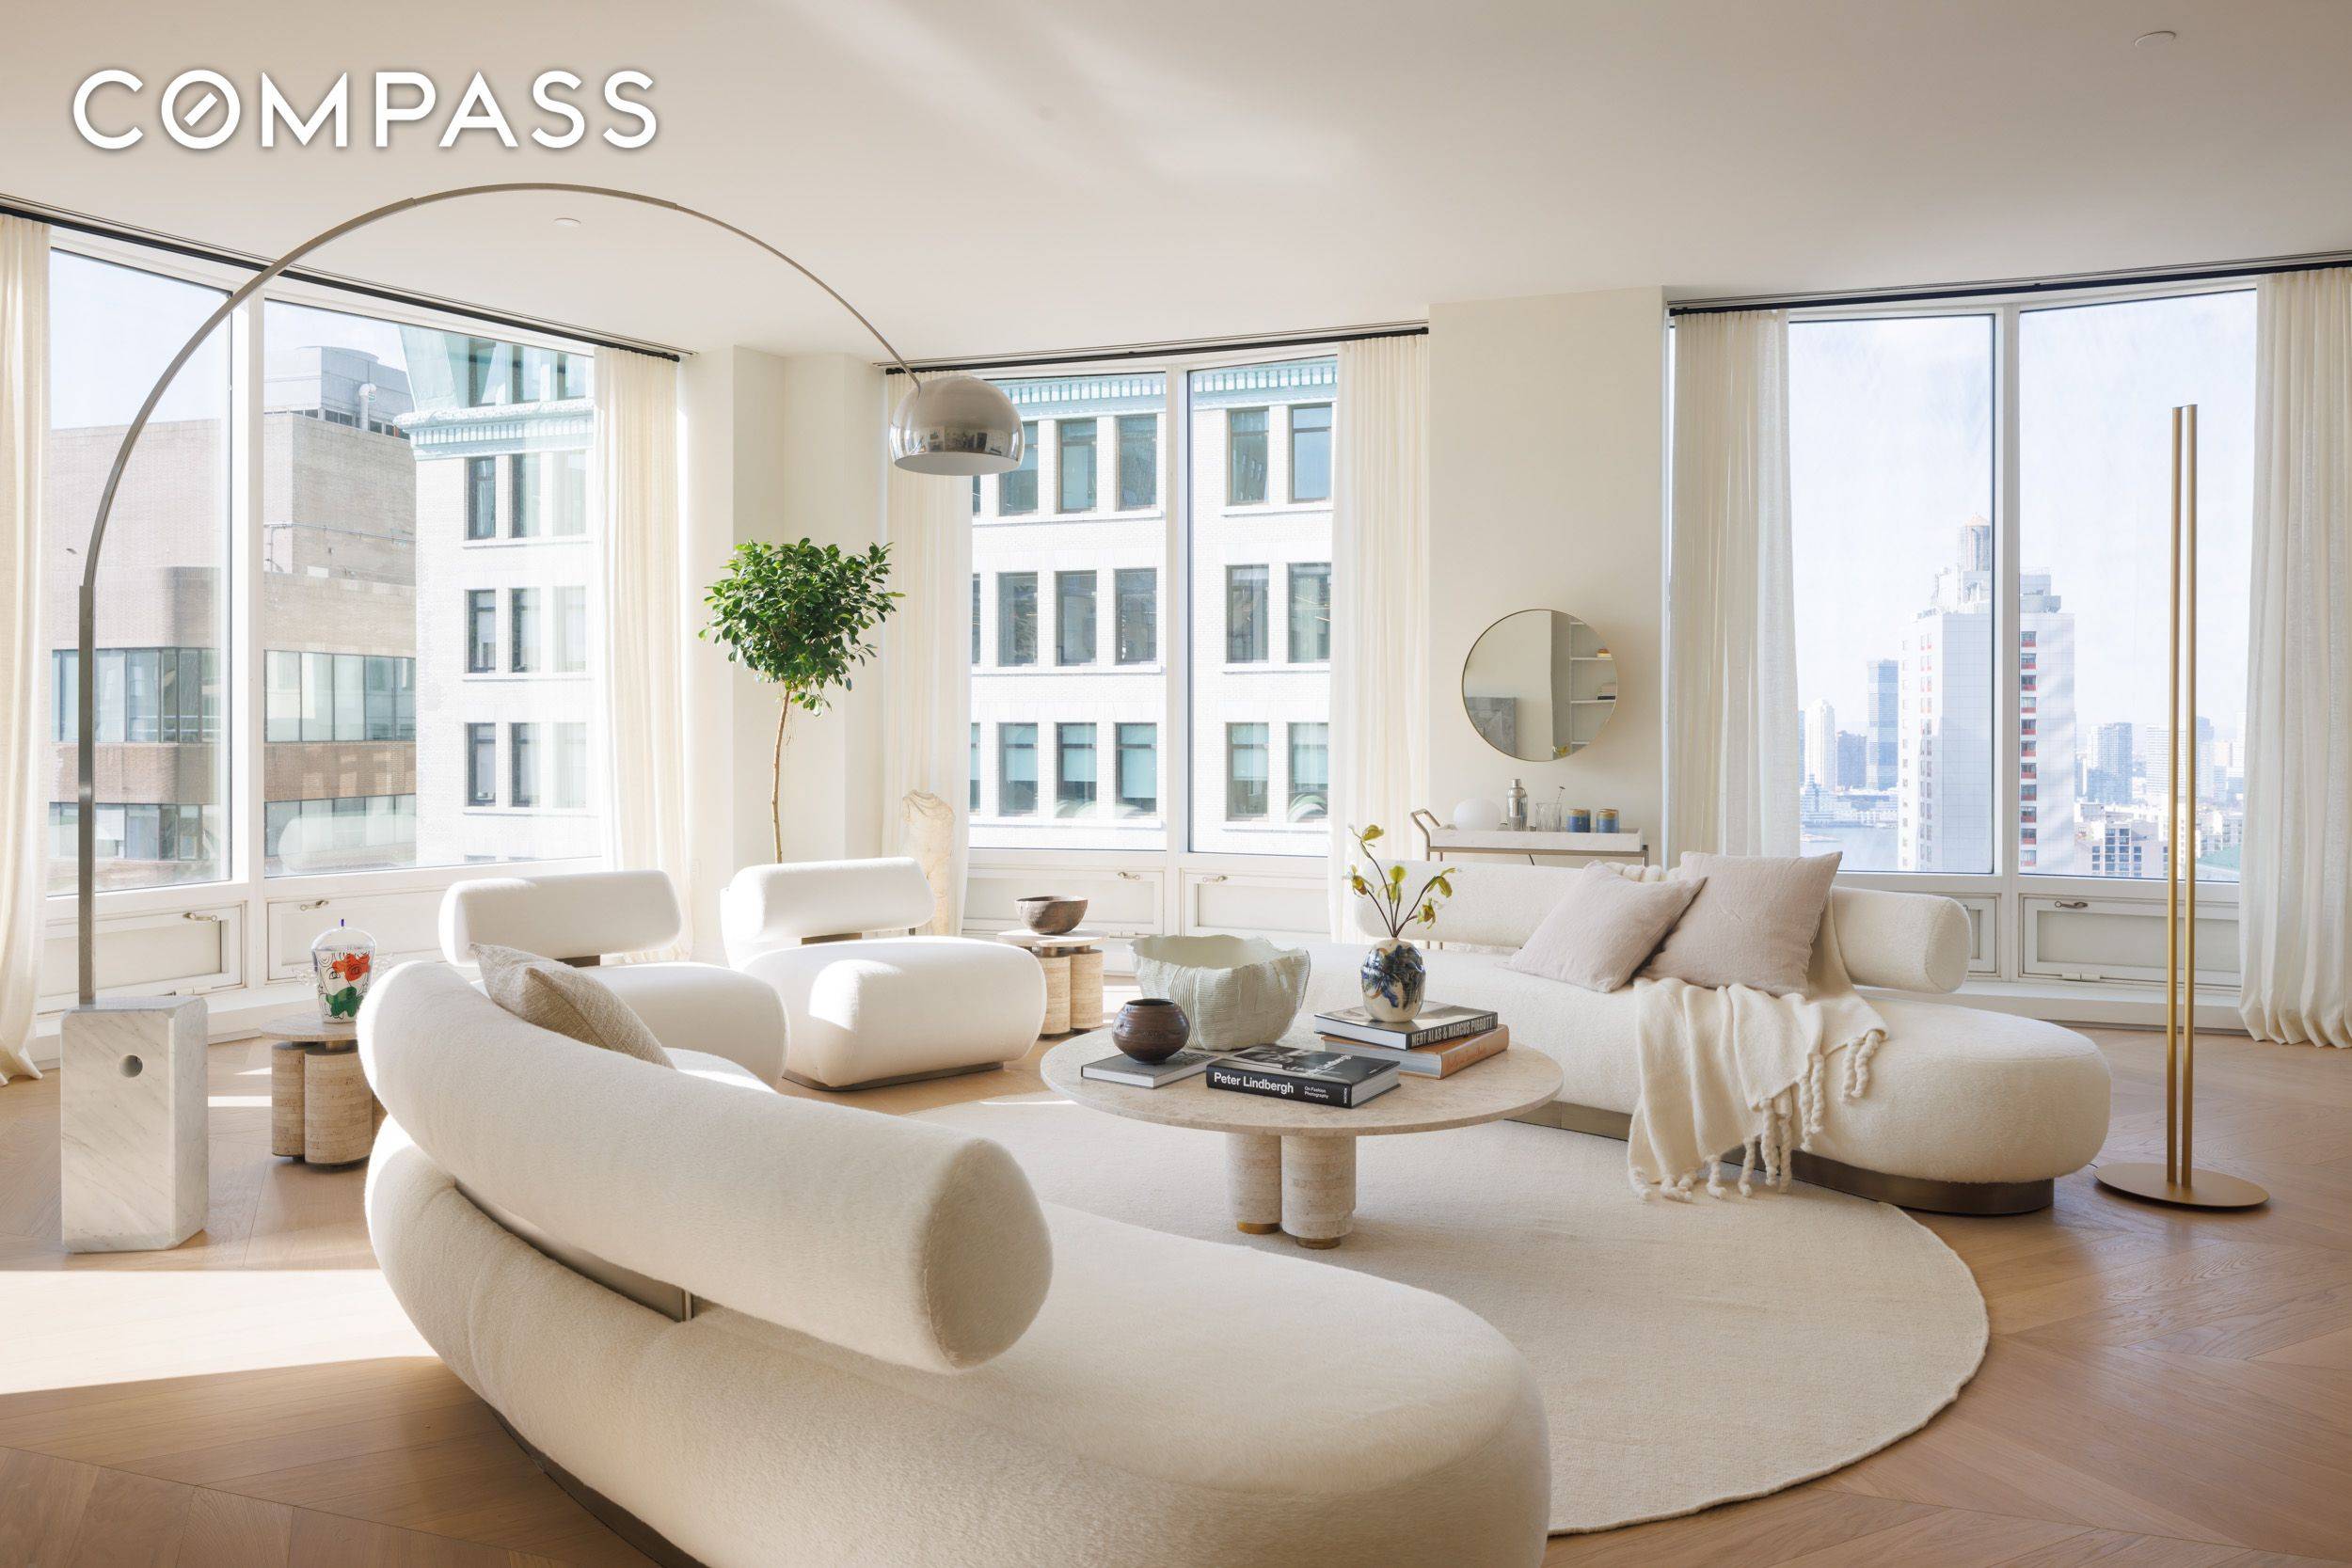 Residence 3404 is an expansive three bedroom home within One Wall Street s brand new glass overbuild that is perched above the Financial District skyline.